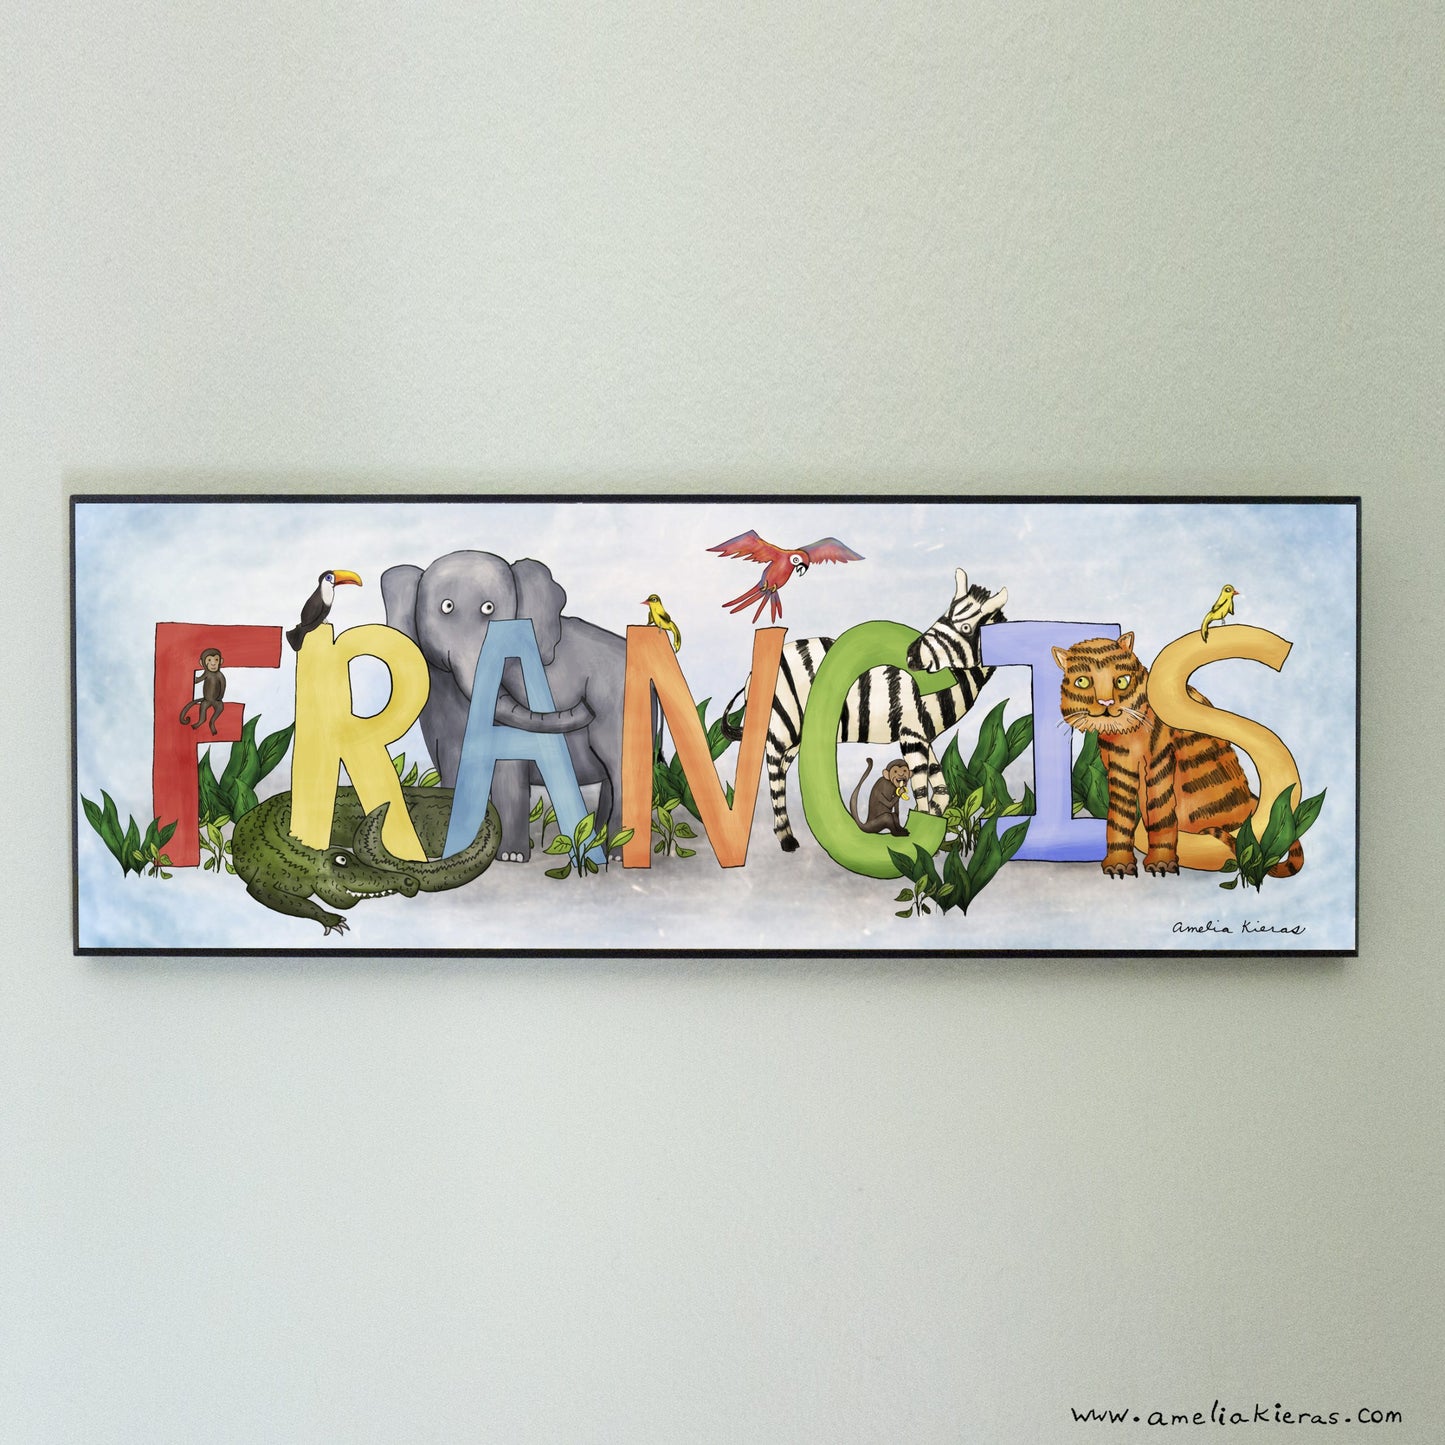 Personalized Child Name Sign - Jungle Animal Theme